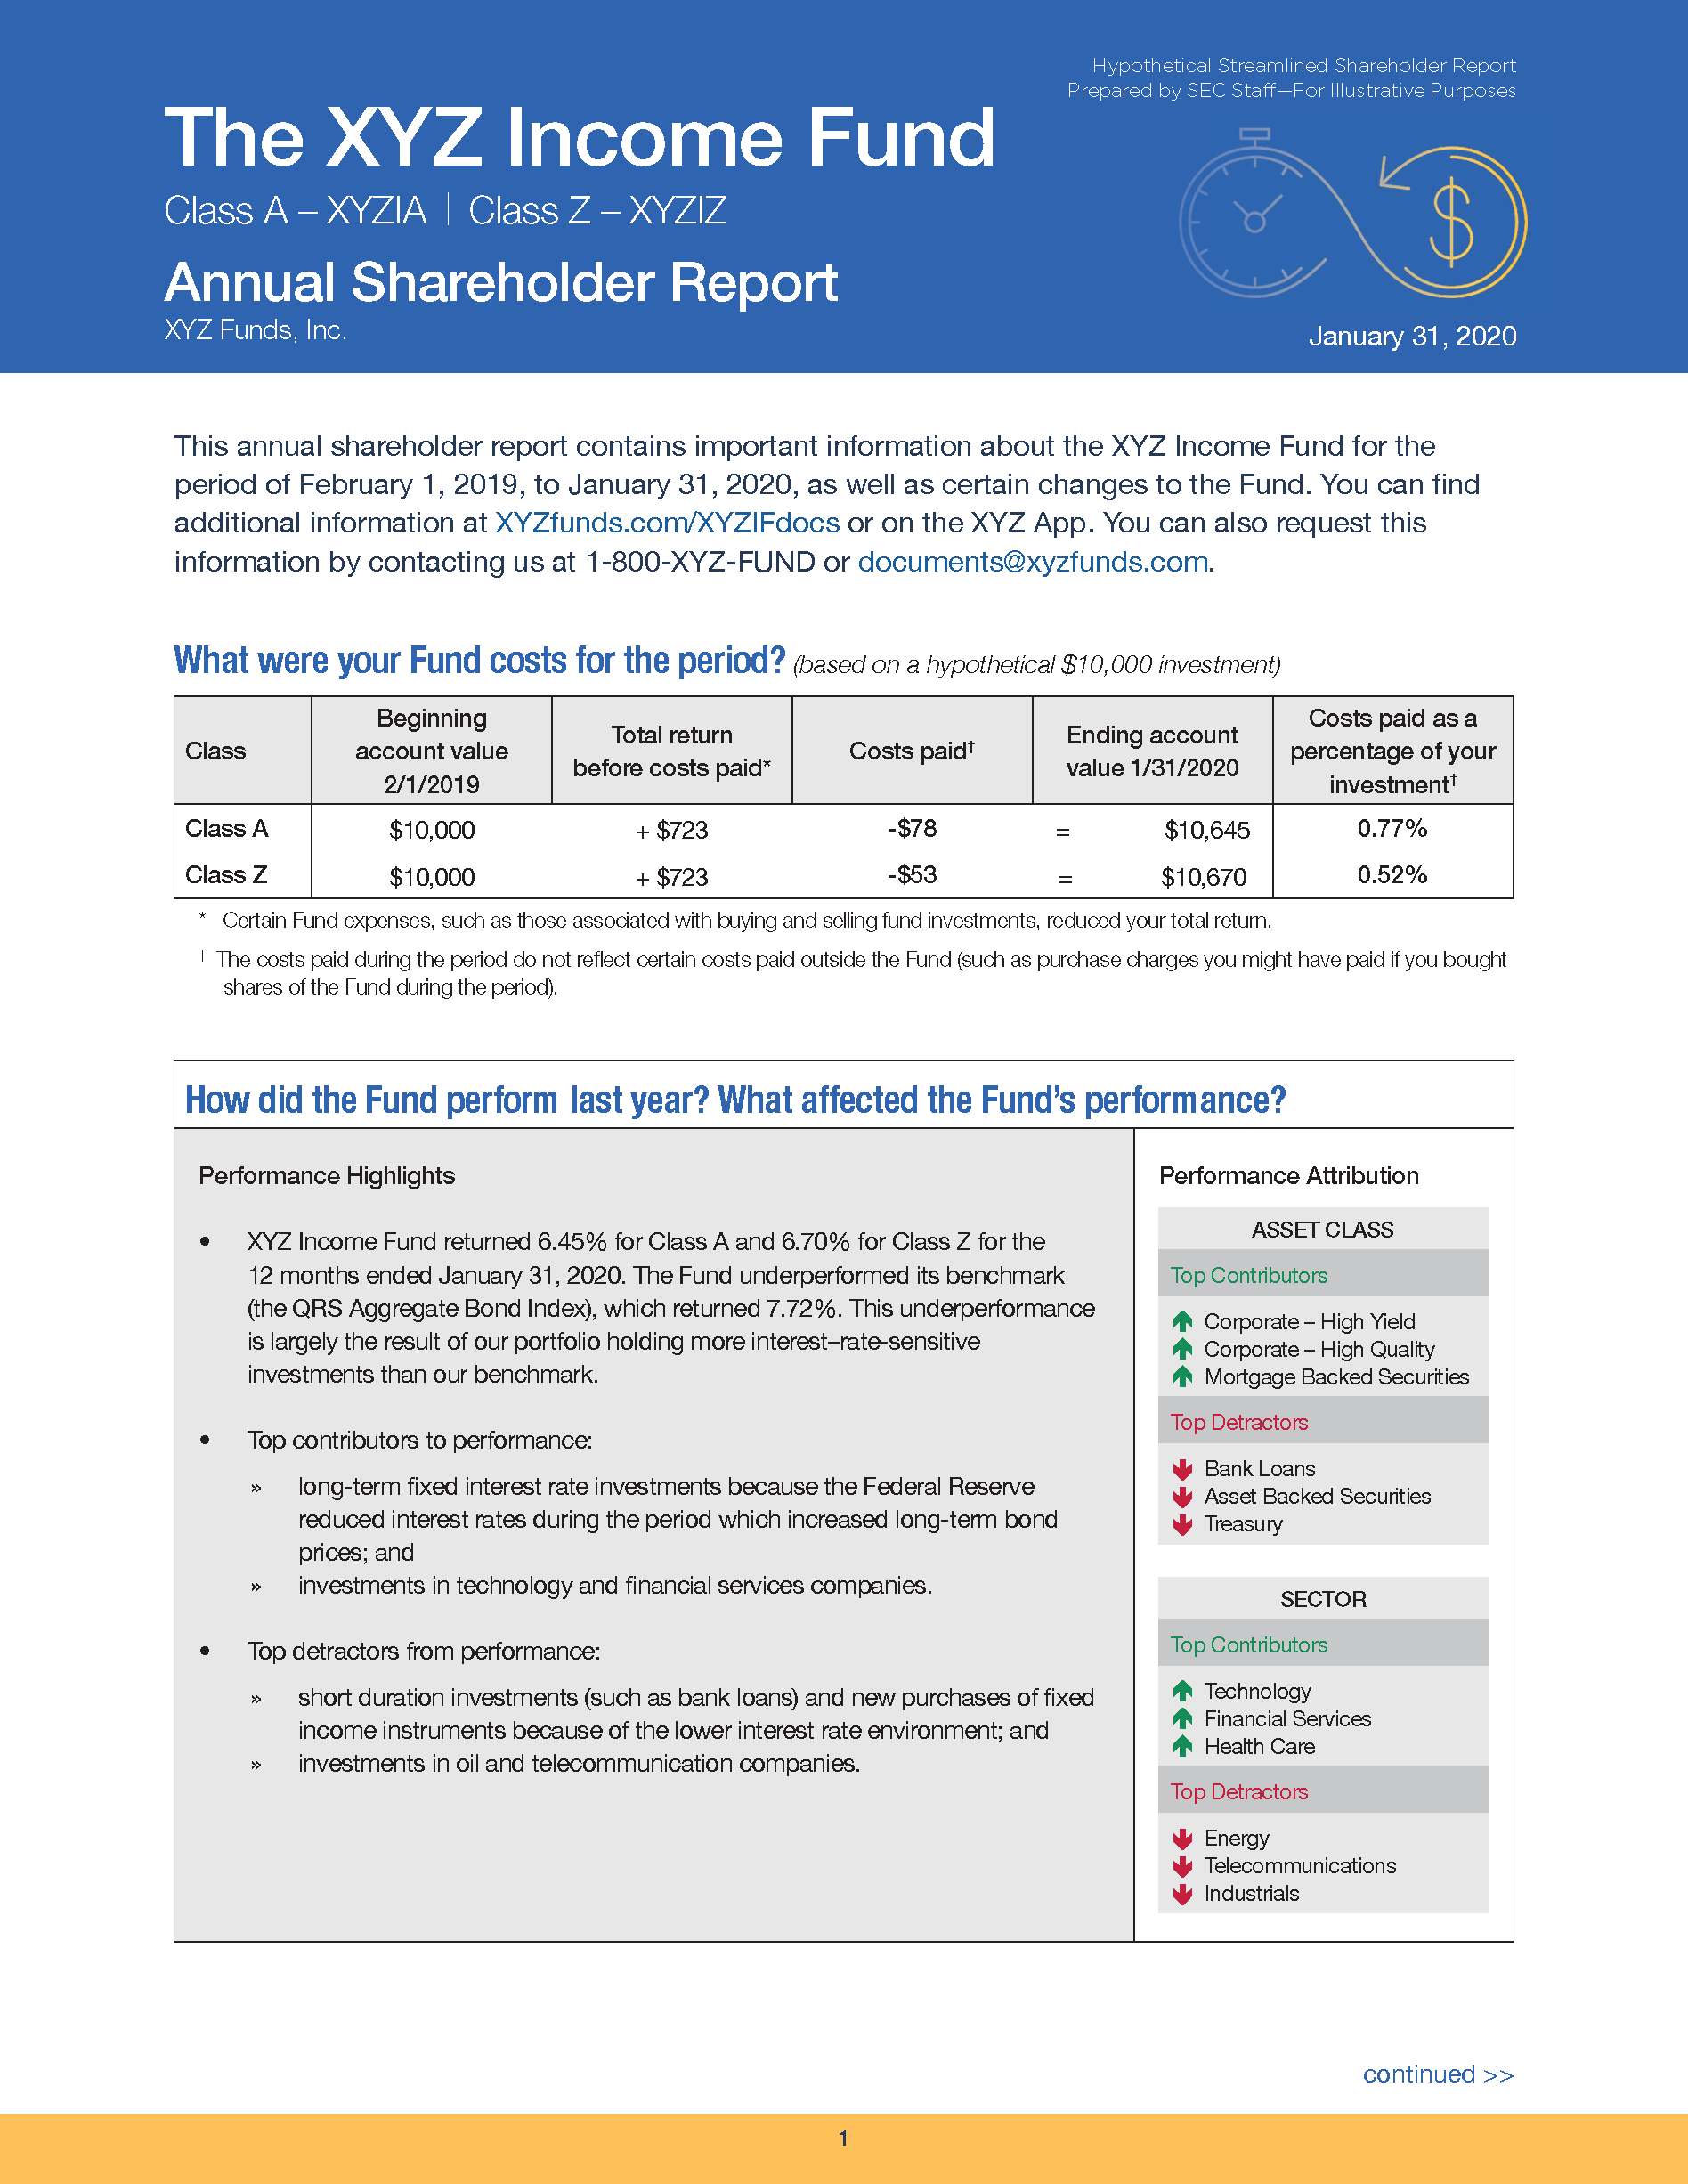 A hypothetical example of a streamlined shareholder report